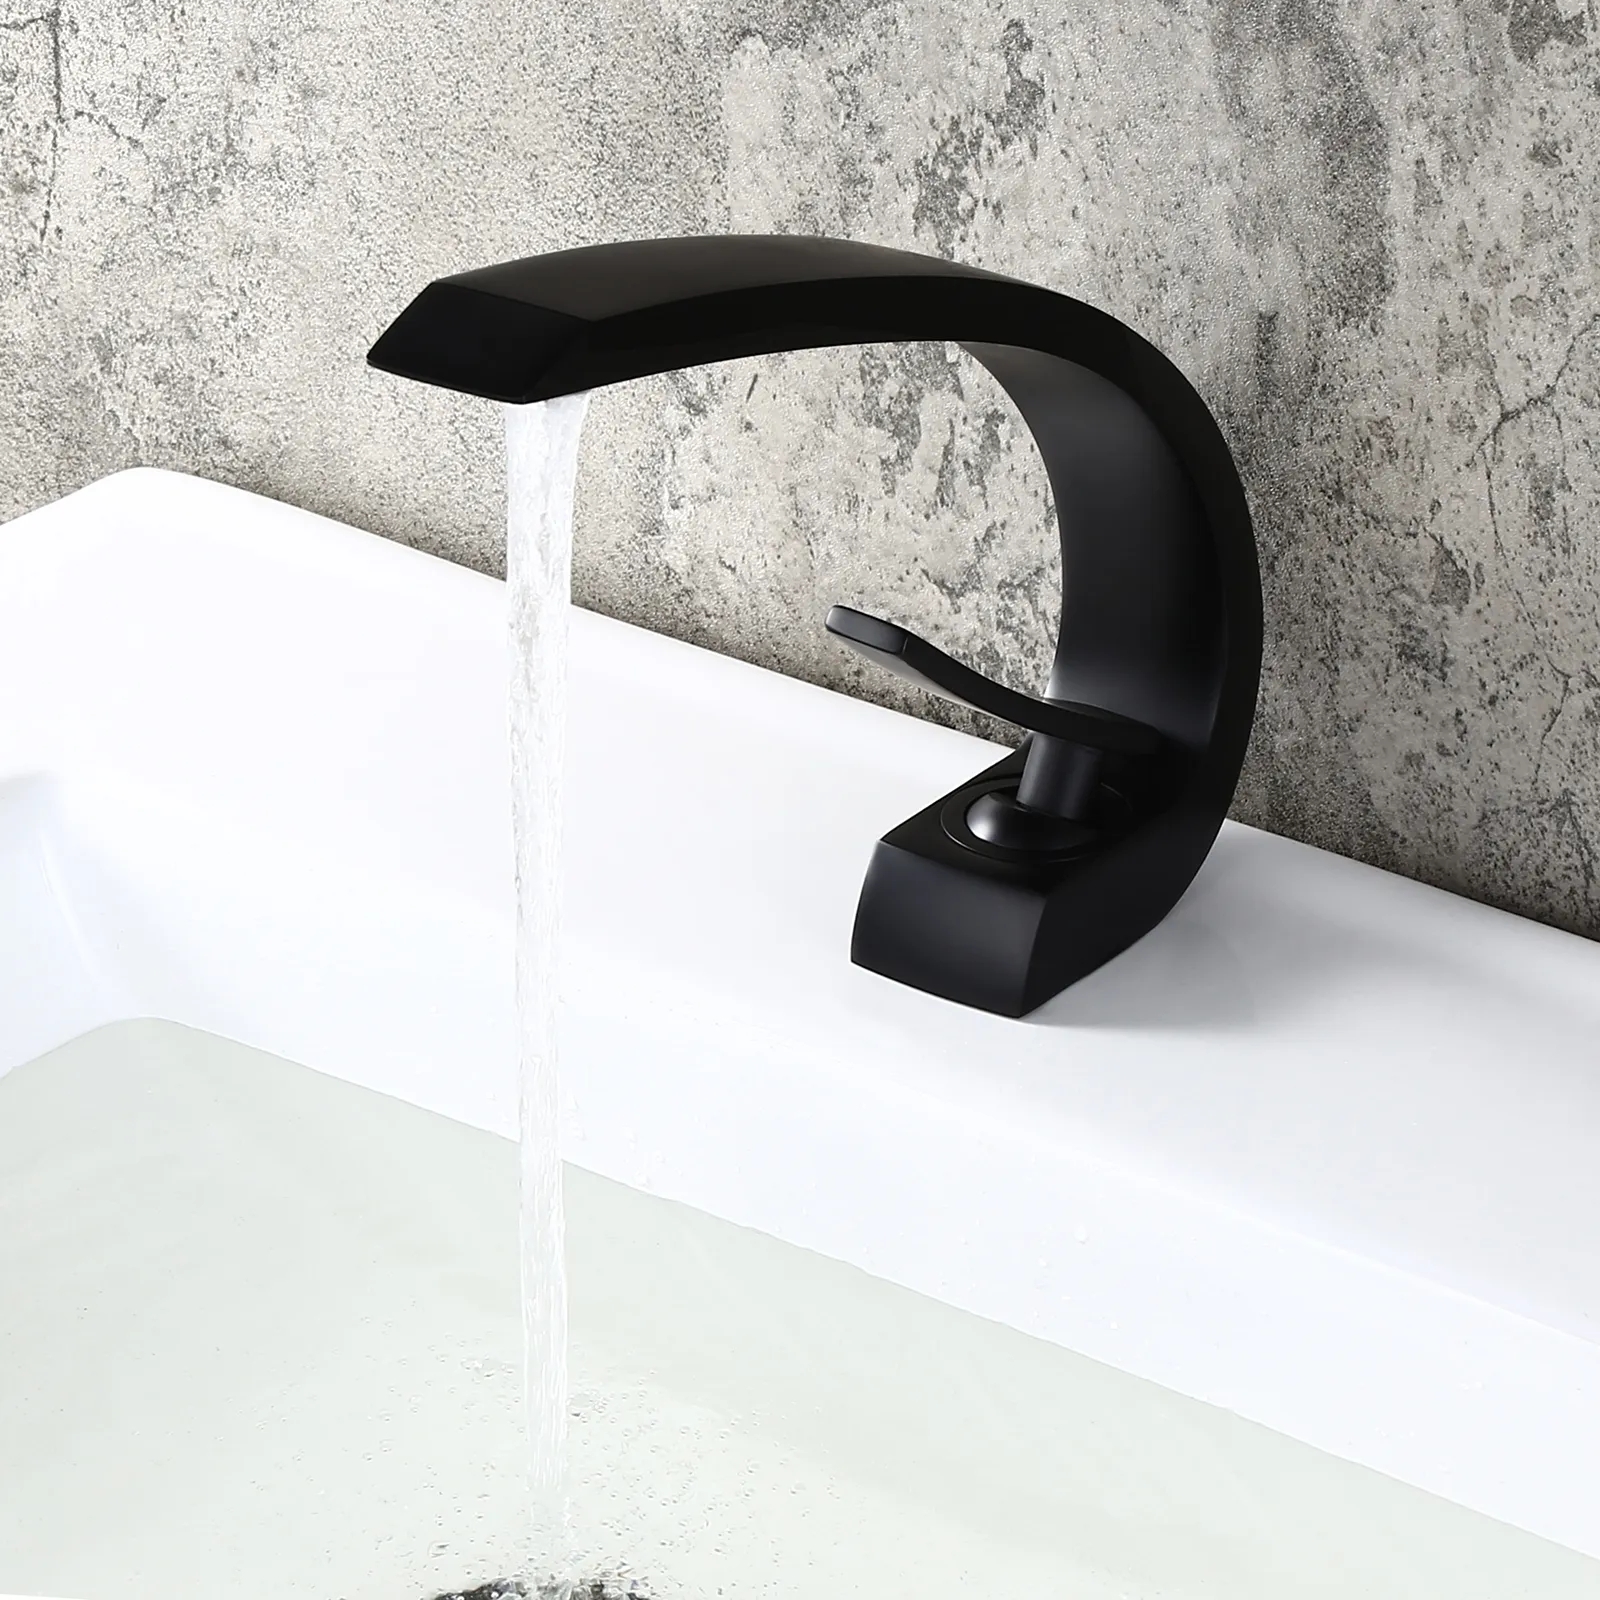 Modern Single Hole 1-Handle C-Shaped Curved Spout Bathroom Sink Faucet with Pop Up Drain in Matte Black